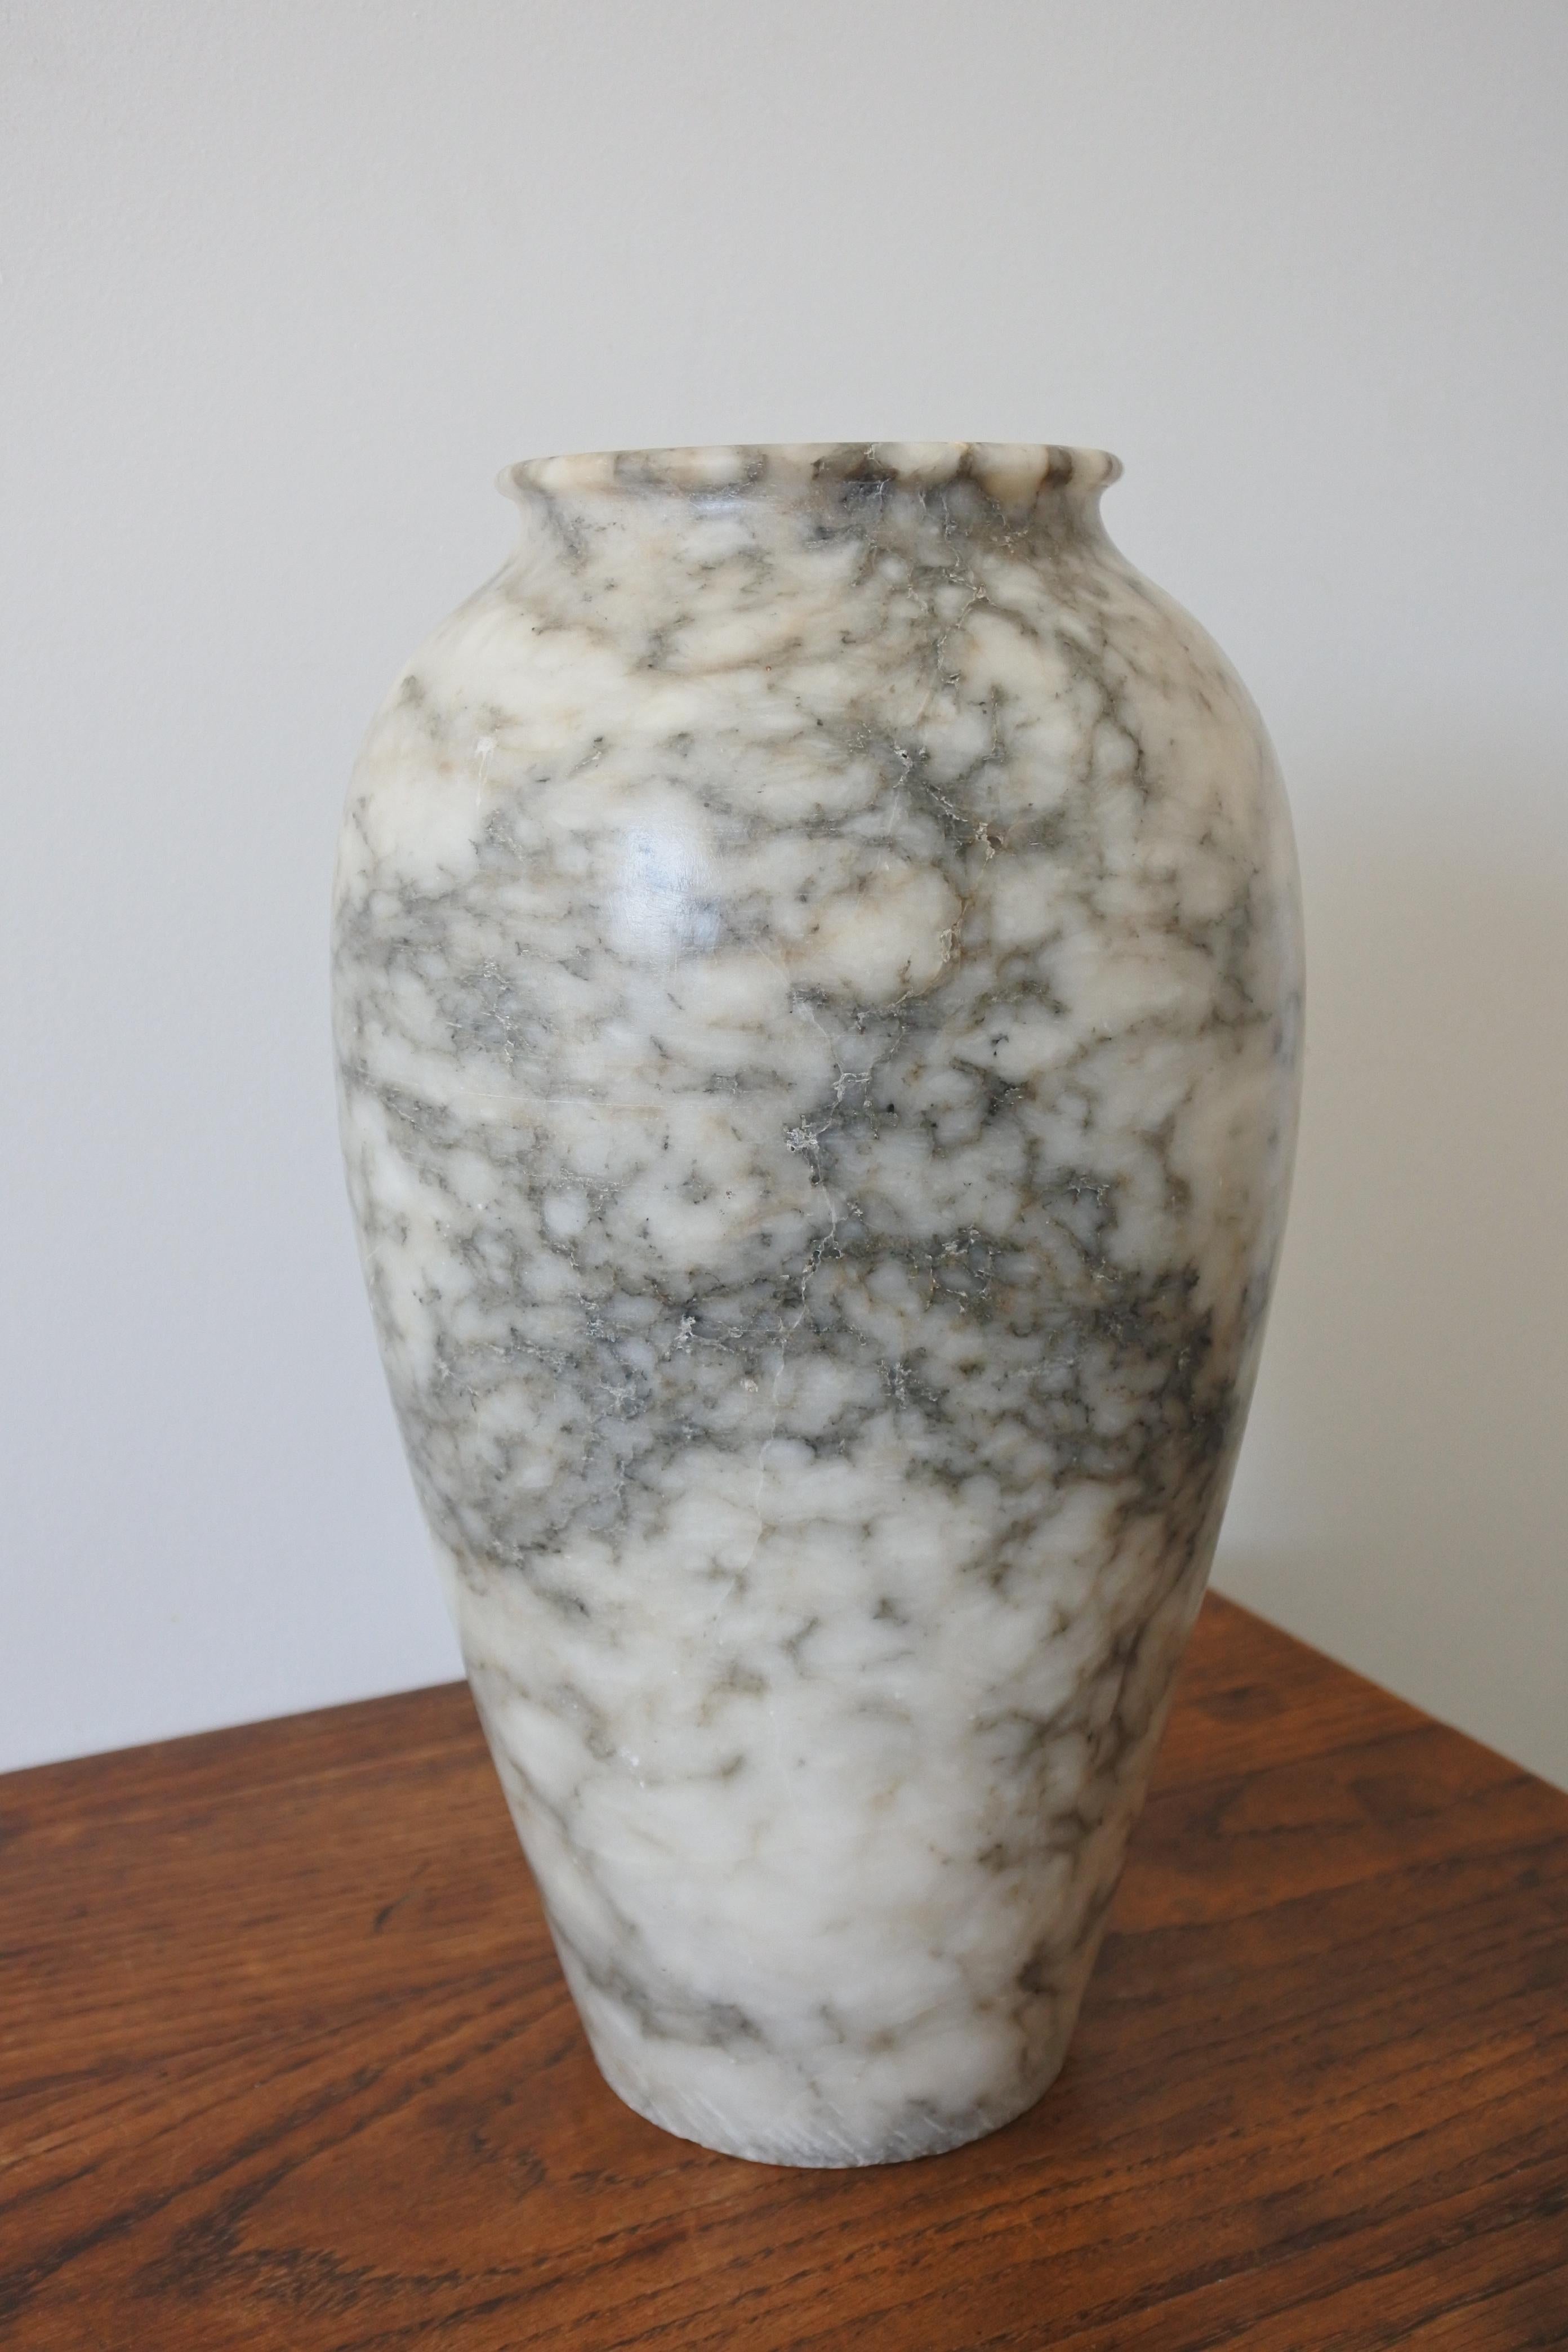 Large Art Deco vase in finely sculpted alabaster
Made in France in the 1930s.